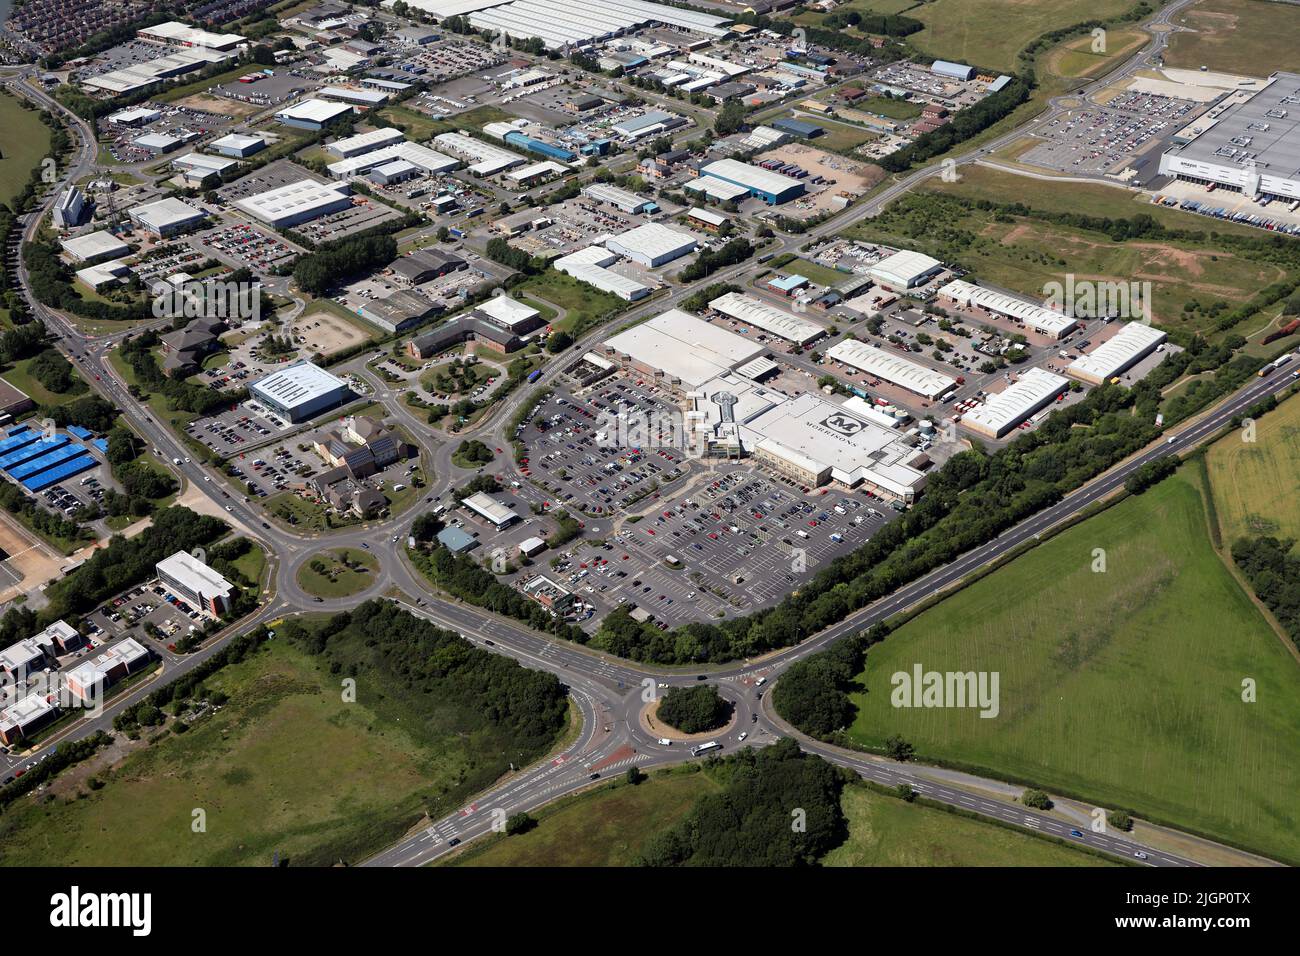 aerial view of the Morton Park retail development at Darliington, County Durham with the Morrisons superstore prominent Stock Photo